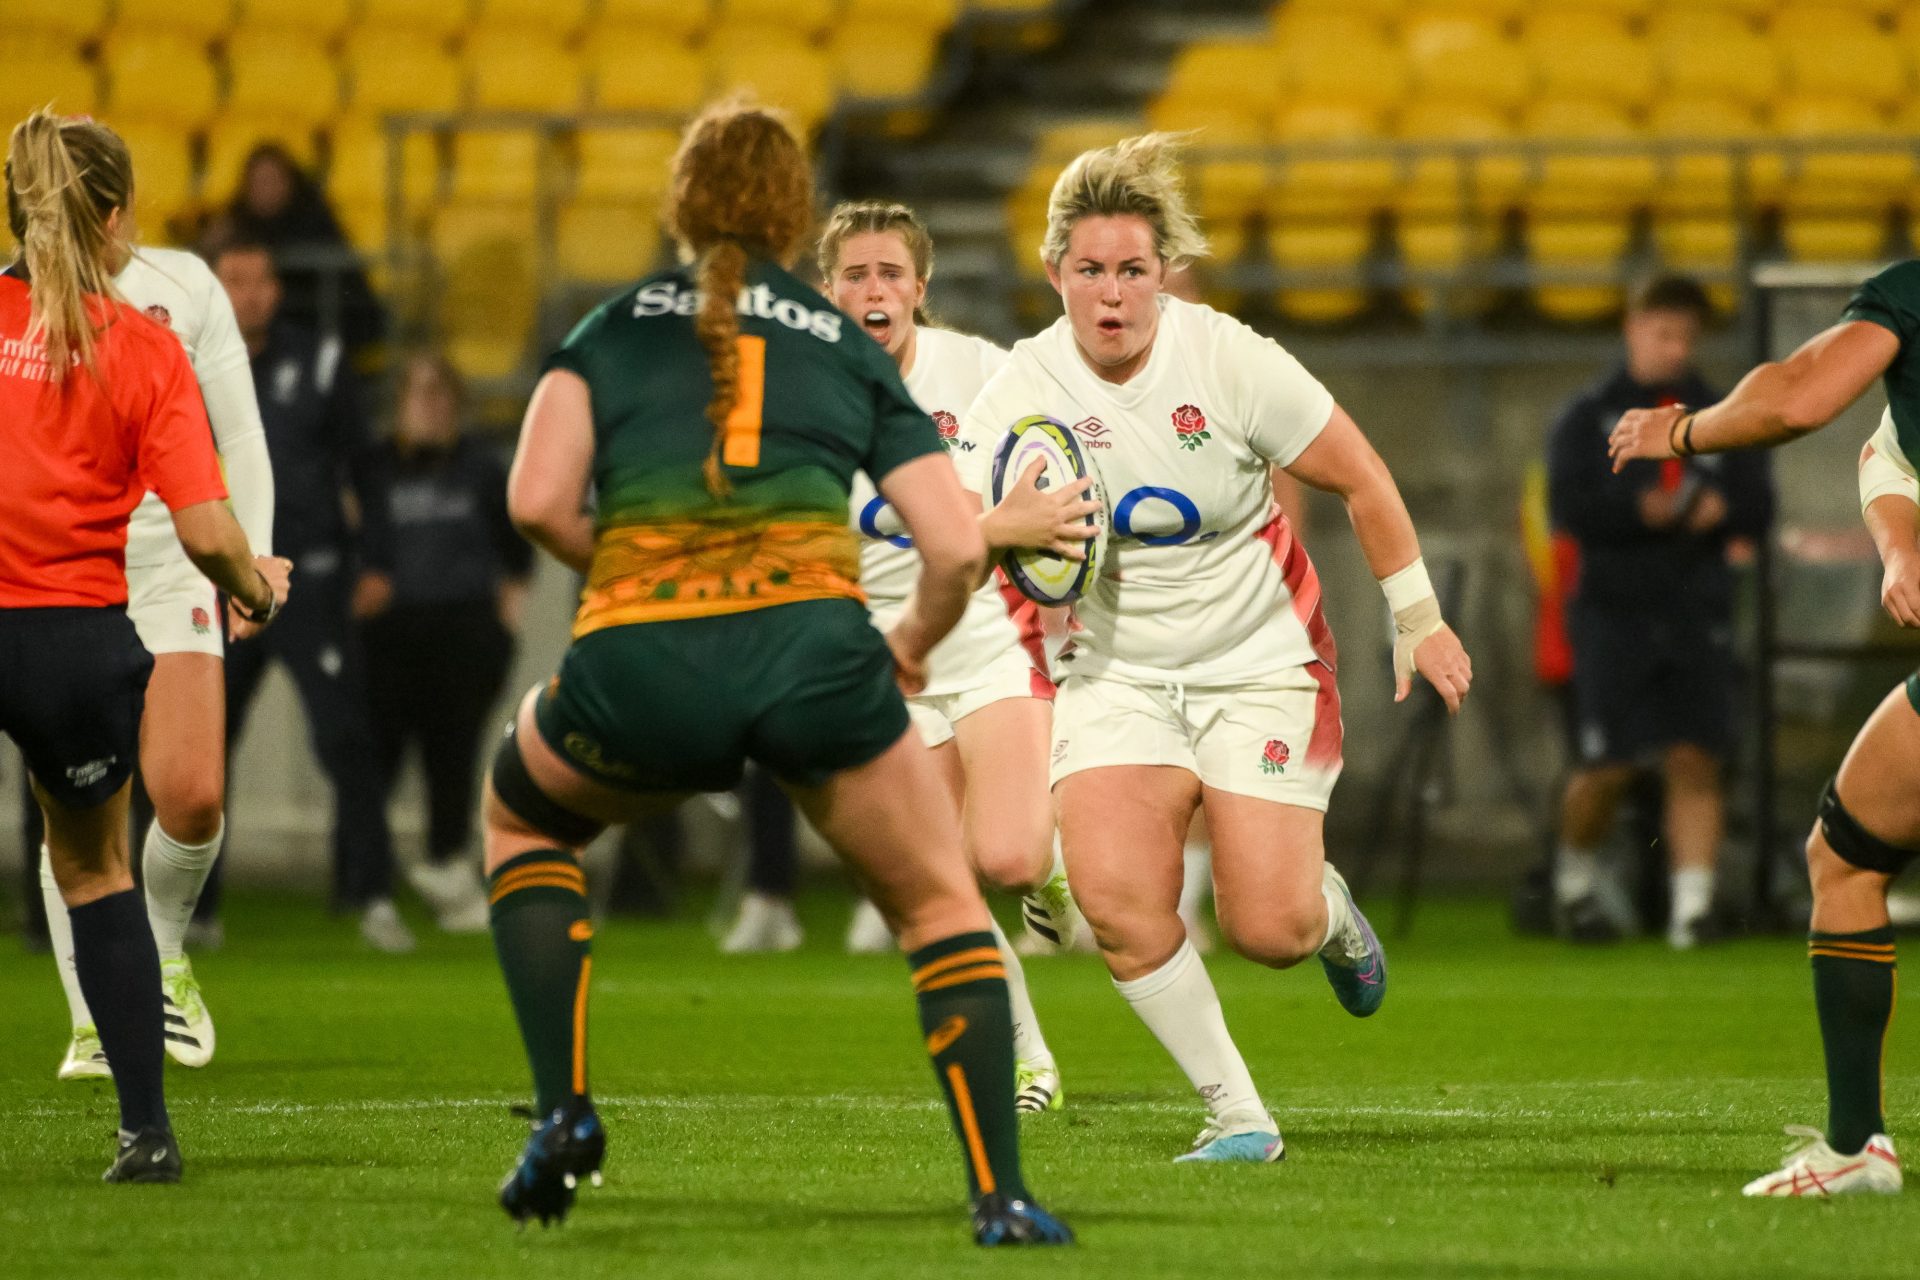 England have set their sights on defending their WXV 1 title in Canada